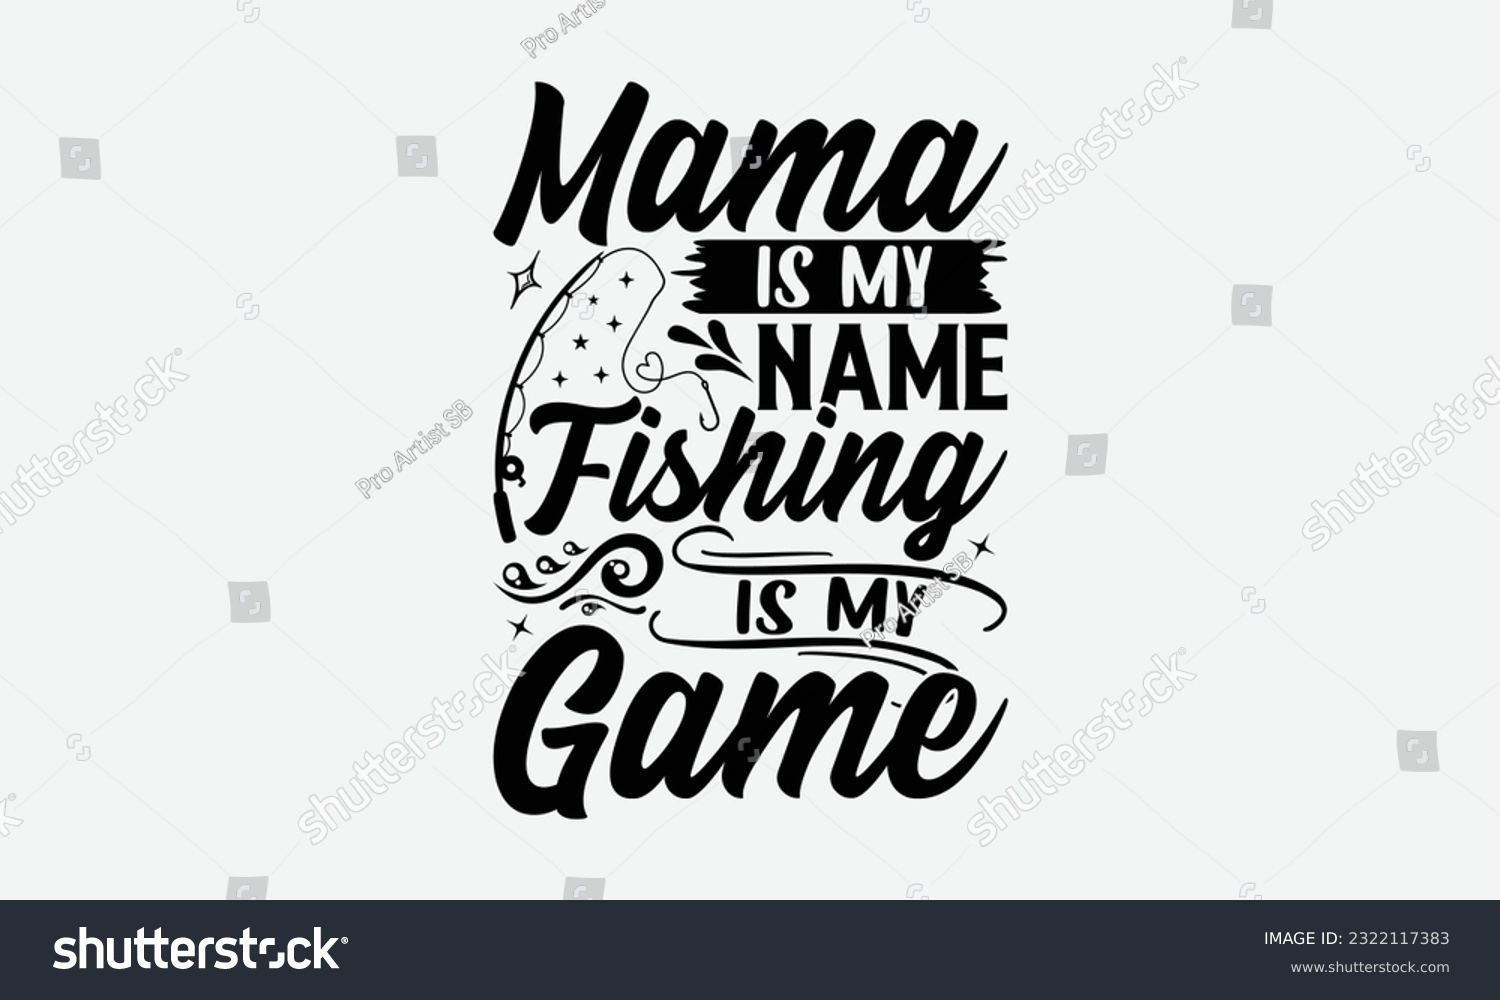 SVG of Mama Is My Name Fishing Is My Game - Fishing SVG Design, Fisherman Quotes, And Handmade Calligraphy Vector Illustration, Isolated On White Background. svg